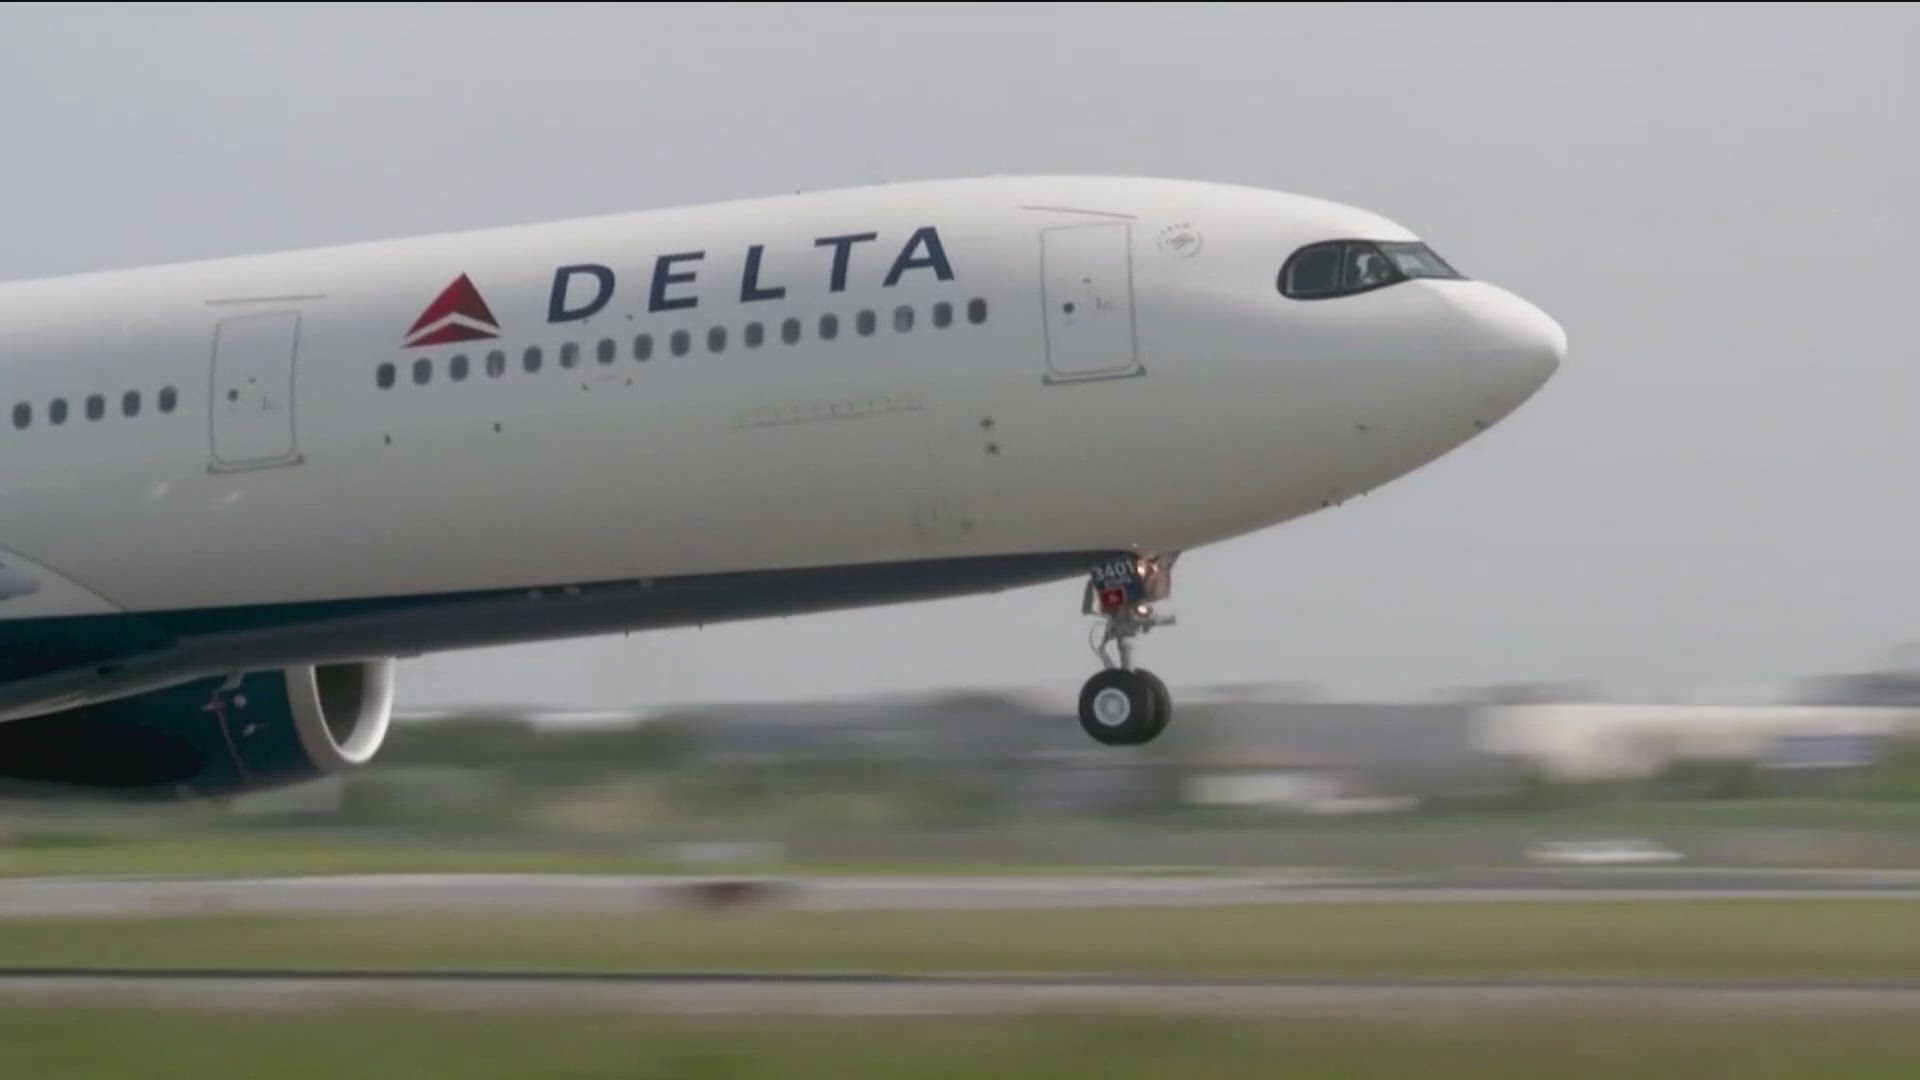 The boost in pay come as Delta braces for another attempt by a union to represent its flight attendants.